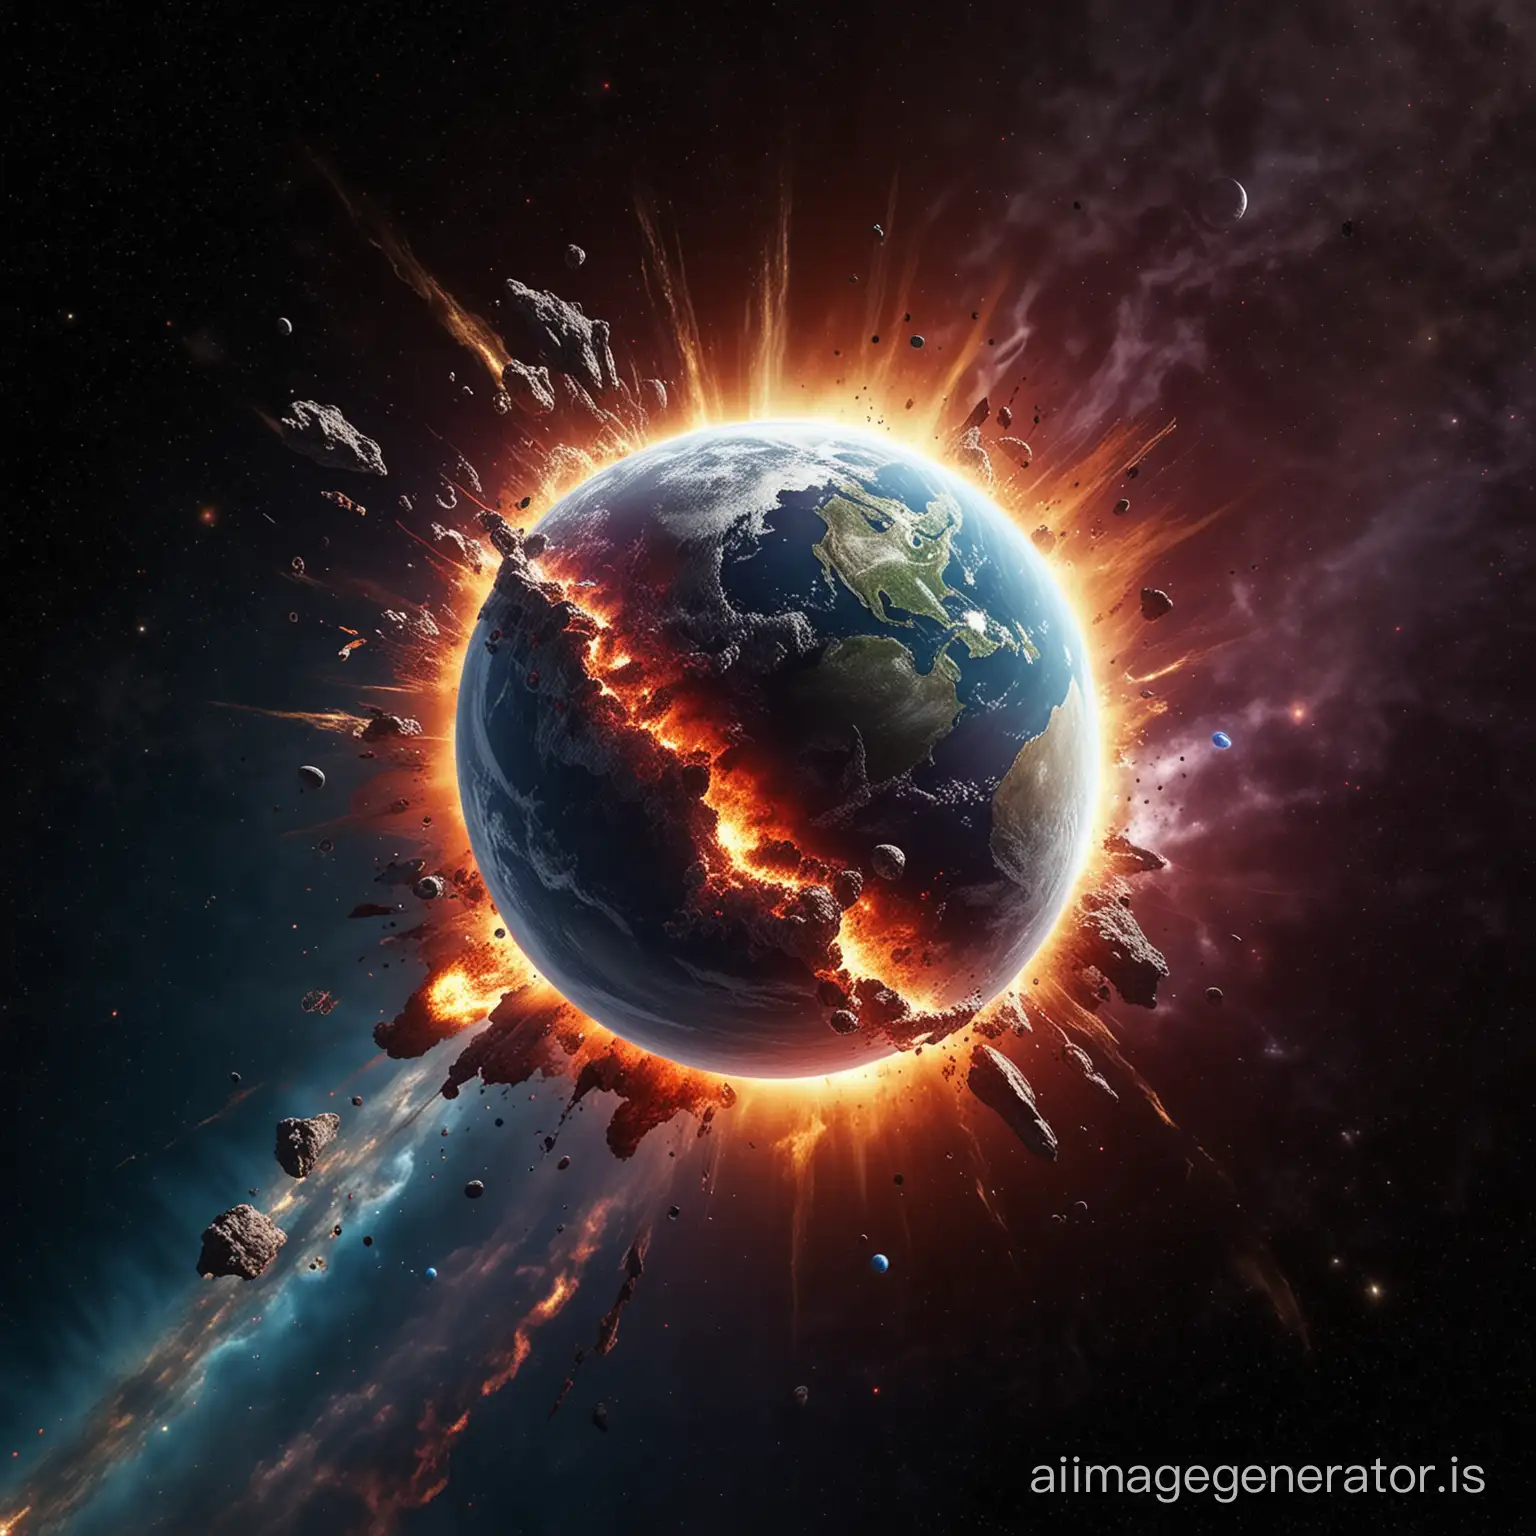 A detailed photorealistic 3D render of planet Earth colliding with the Moon, surrounding them is a white ring taking center stage as the focal point with a vivid a red streak and a fusion between them, a red and yellow fire and dark smoke coming out of the explosion, illustrating the intensity of the impact. The Moon is positioned on the left, half the size of Earth, which is on the right. The collision has shattered a quarter of the Moon, giving the impression that it’s being assimilated by Earth. The two planets are set against a beautiful star-filled sky, with vibrant shades of blue and hints of pink and purple, encapsulating the scene in a celestial embrace. The planet Earth is enveloped in its blue atmosphere. The scene evokes a sense of wonder and awe, as if we are witnessing a celestial event of cosmic proportions. The colors in the image are rich and deep, while a shinning star in the left of the background adds a touch of brilliance to the space scene splendor.